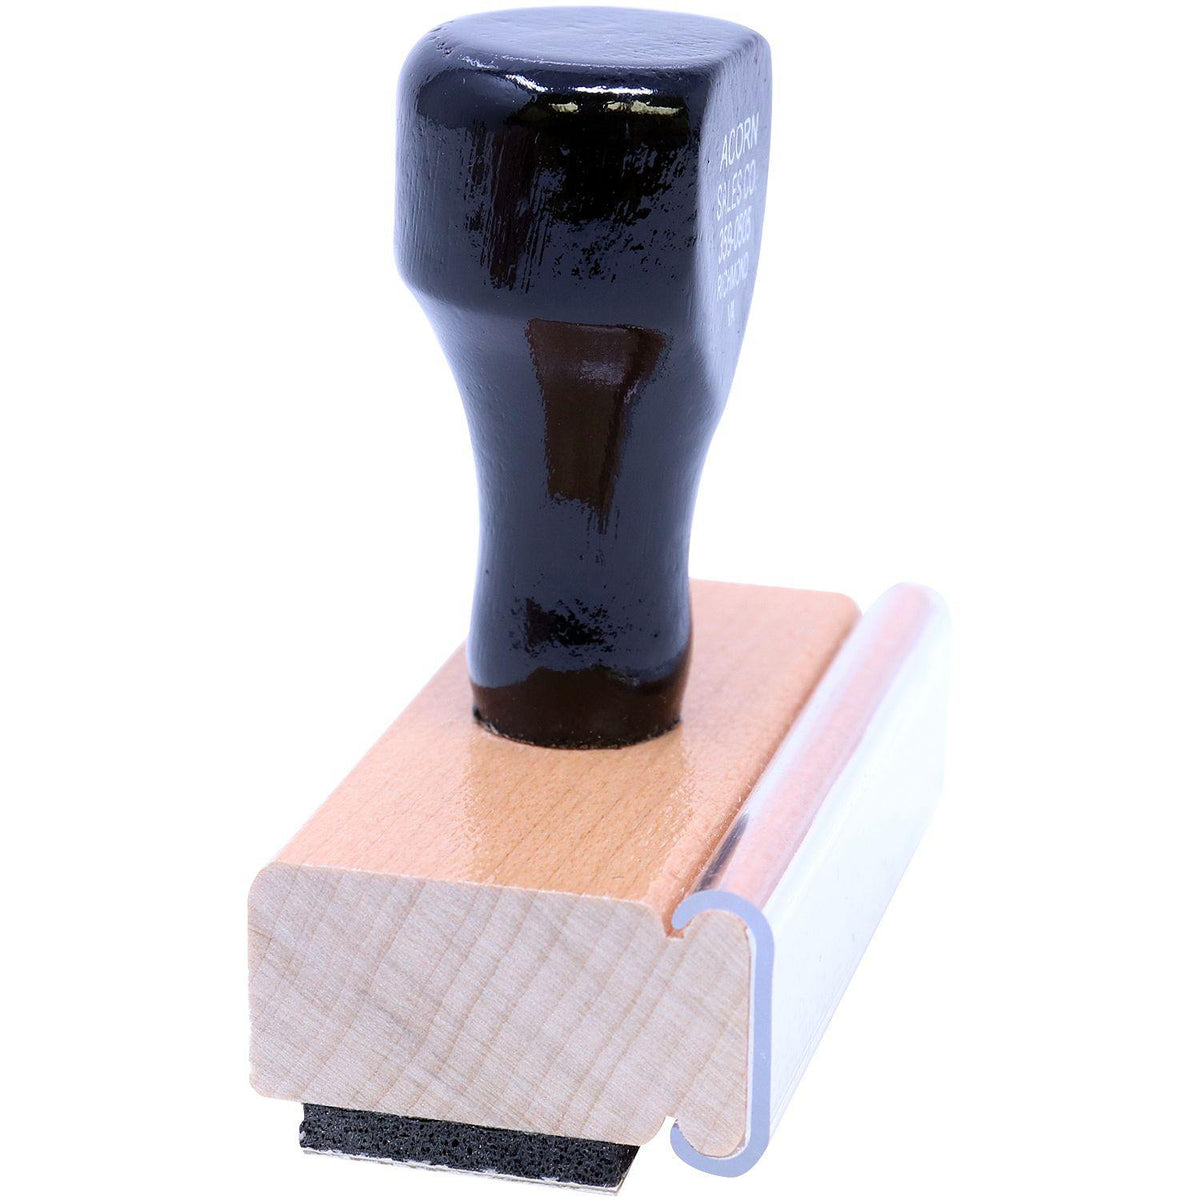 Side View of Amortizado Rubber Stamp at an Angle